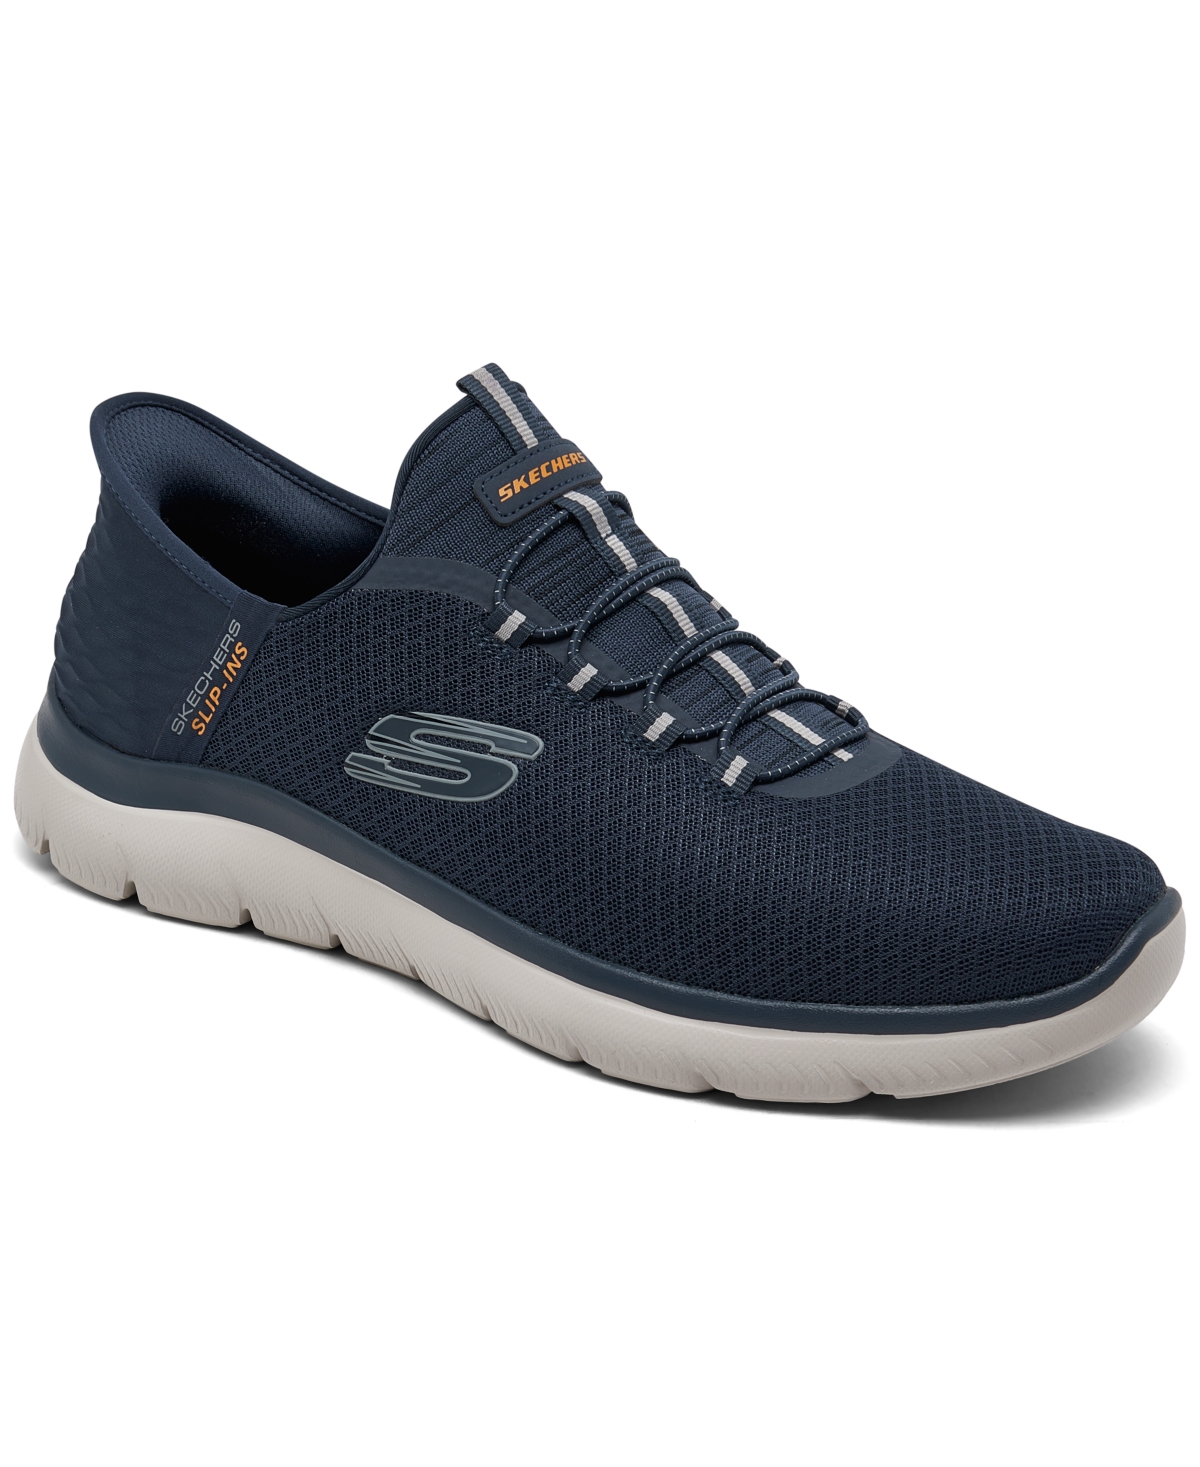 Men's Slip-ins- Summits - High Range Casual Sneakers from Finish Line - Navy